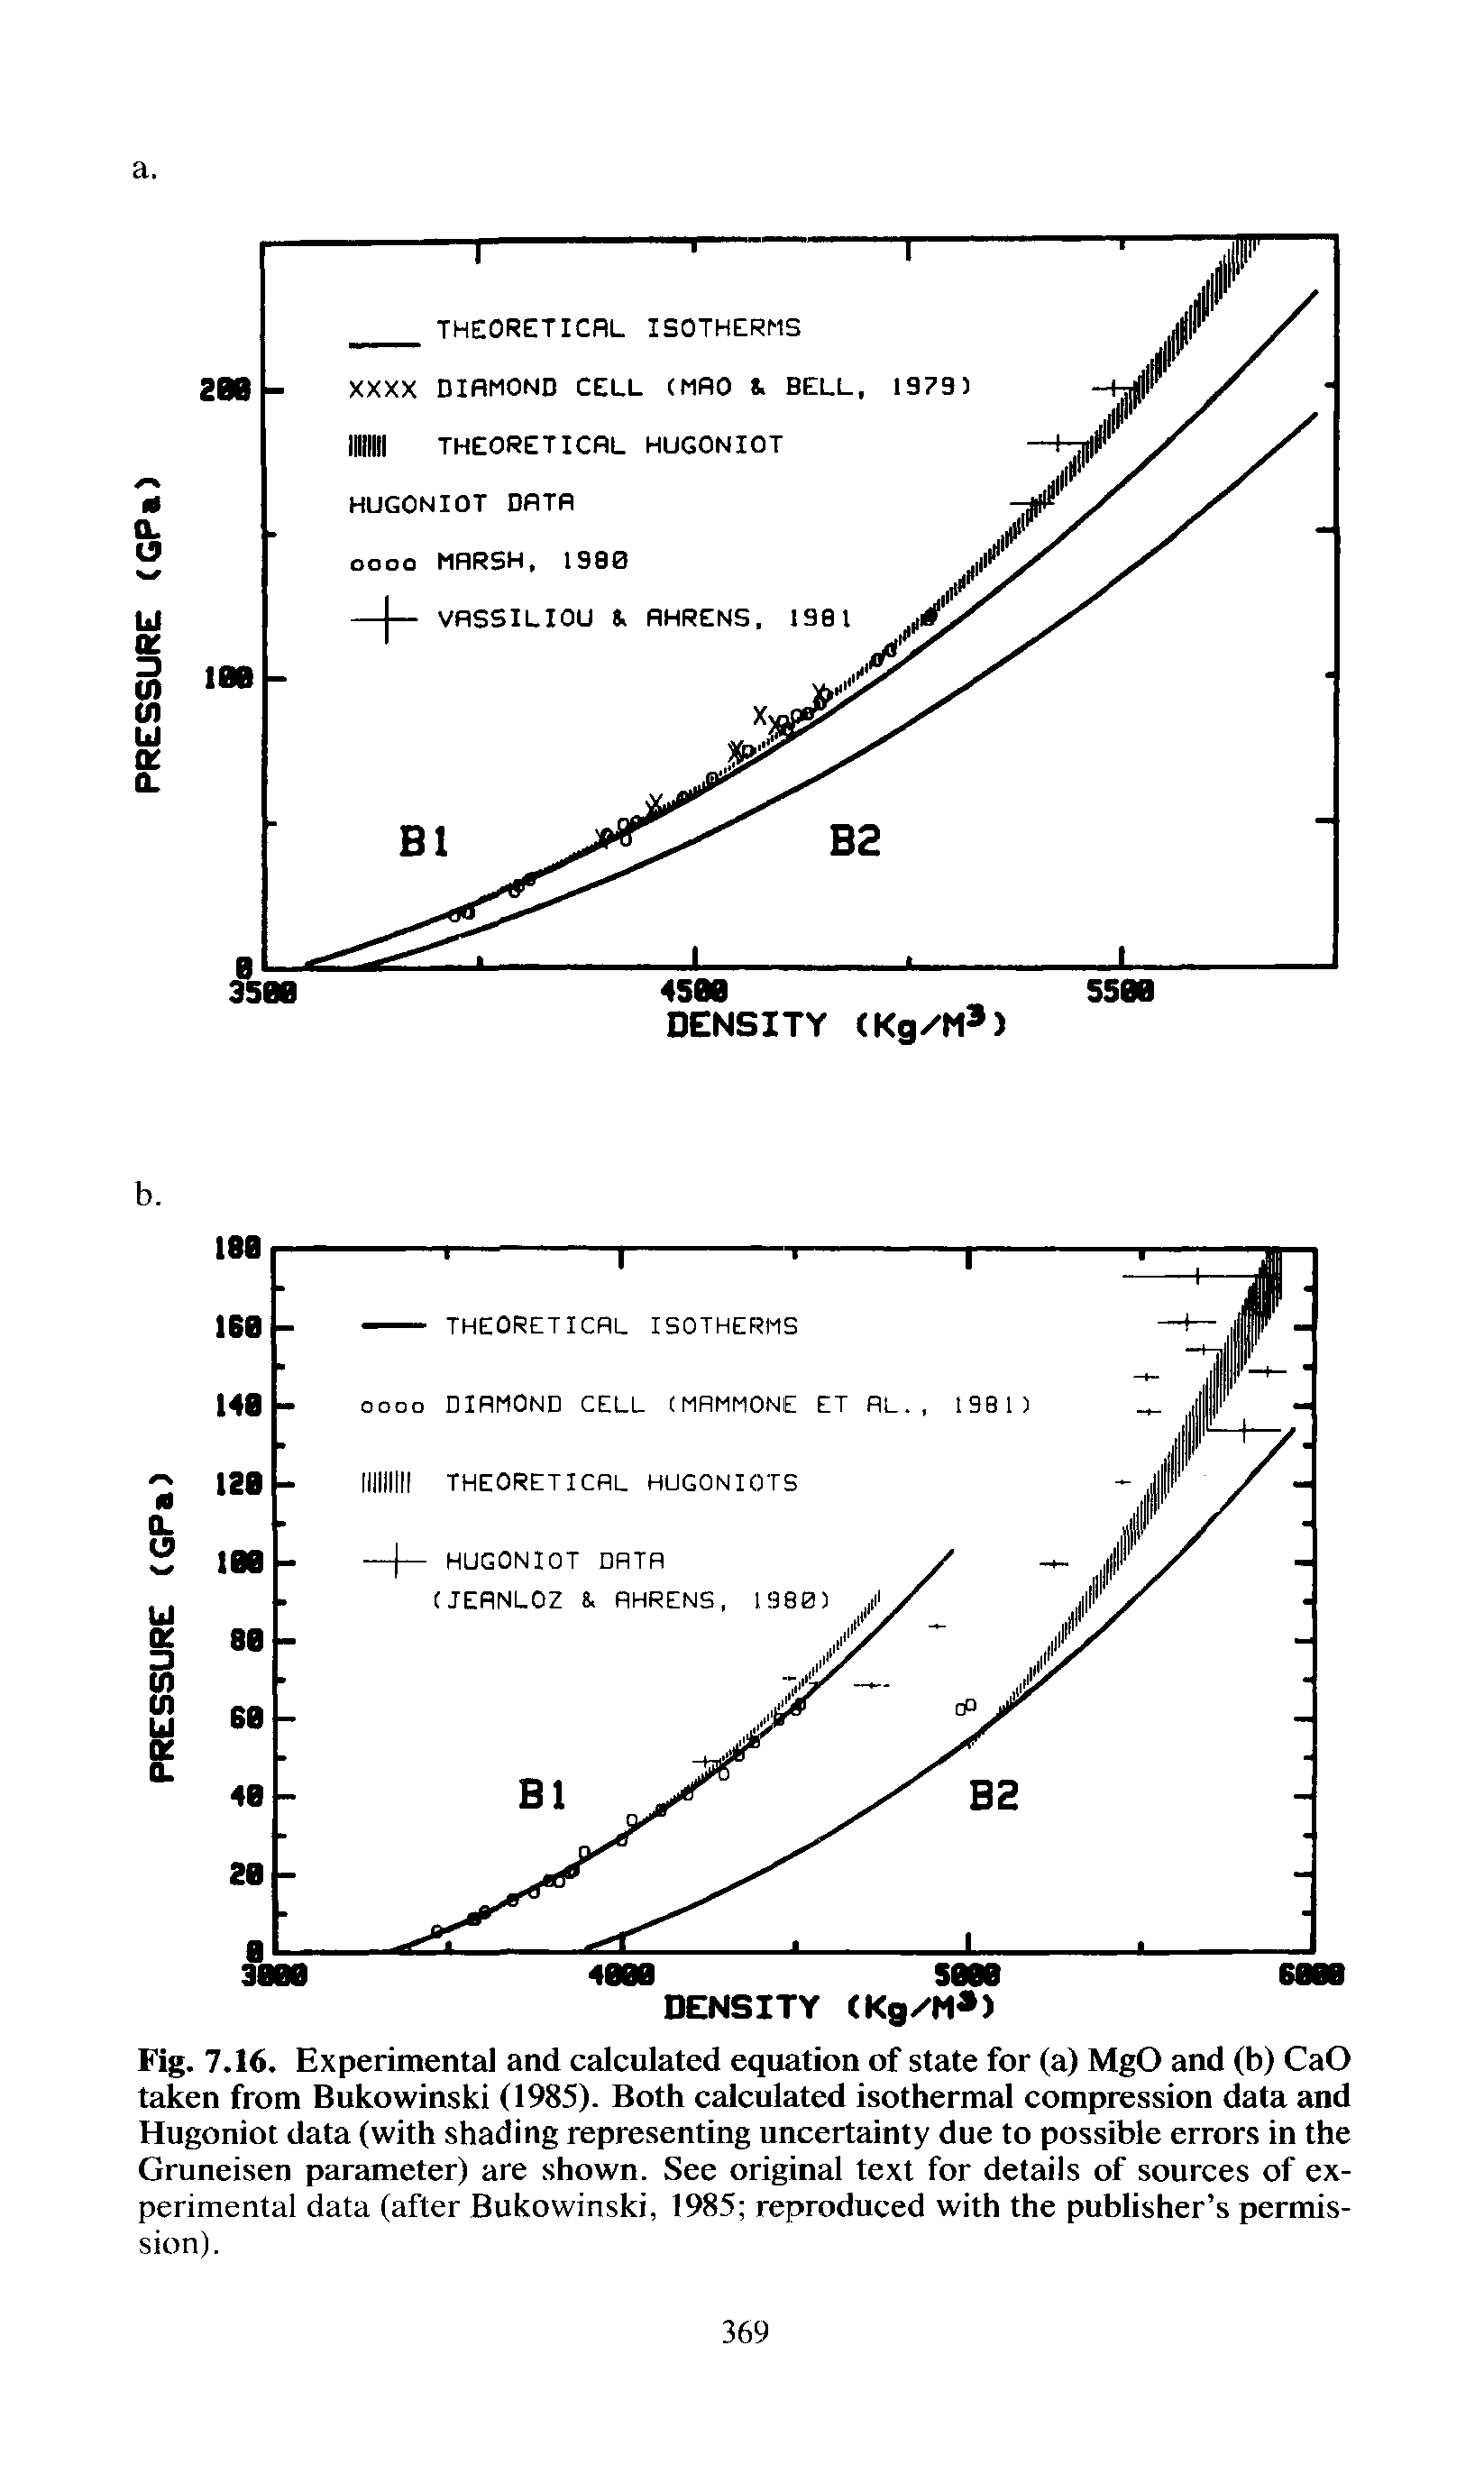 Fig. 7.16. Experimental and calculated equation of state for (a) MgO and (b) CaO taken from Bukowinski (1985). Both calculated isothermal compression data and Hugoniot data (with shading representing uncertainty due to possible errors in the Gruneisen parameter) are shown. See original text for details of sources of experimental data (after Bukowinski, 1985 reproduced with the publisher s permission).